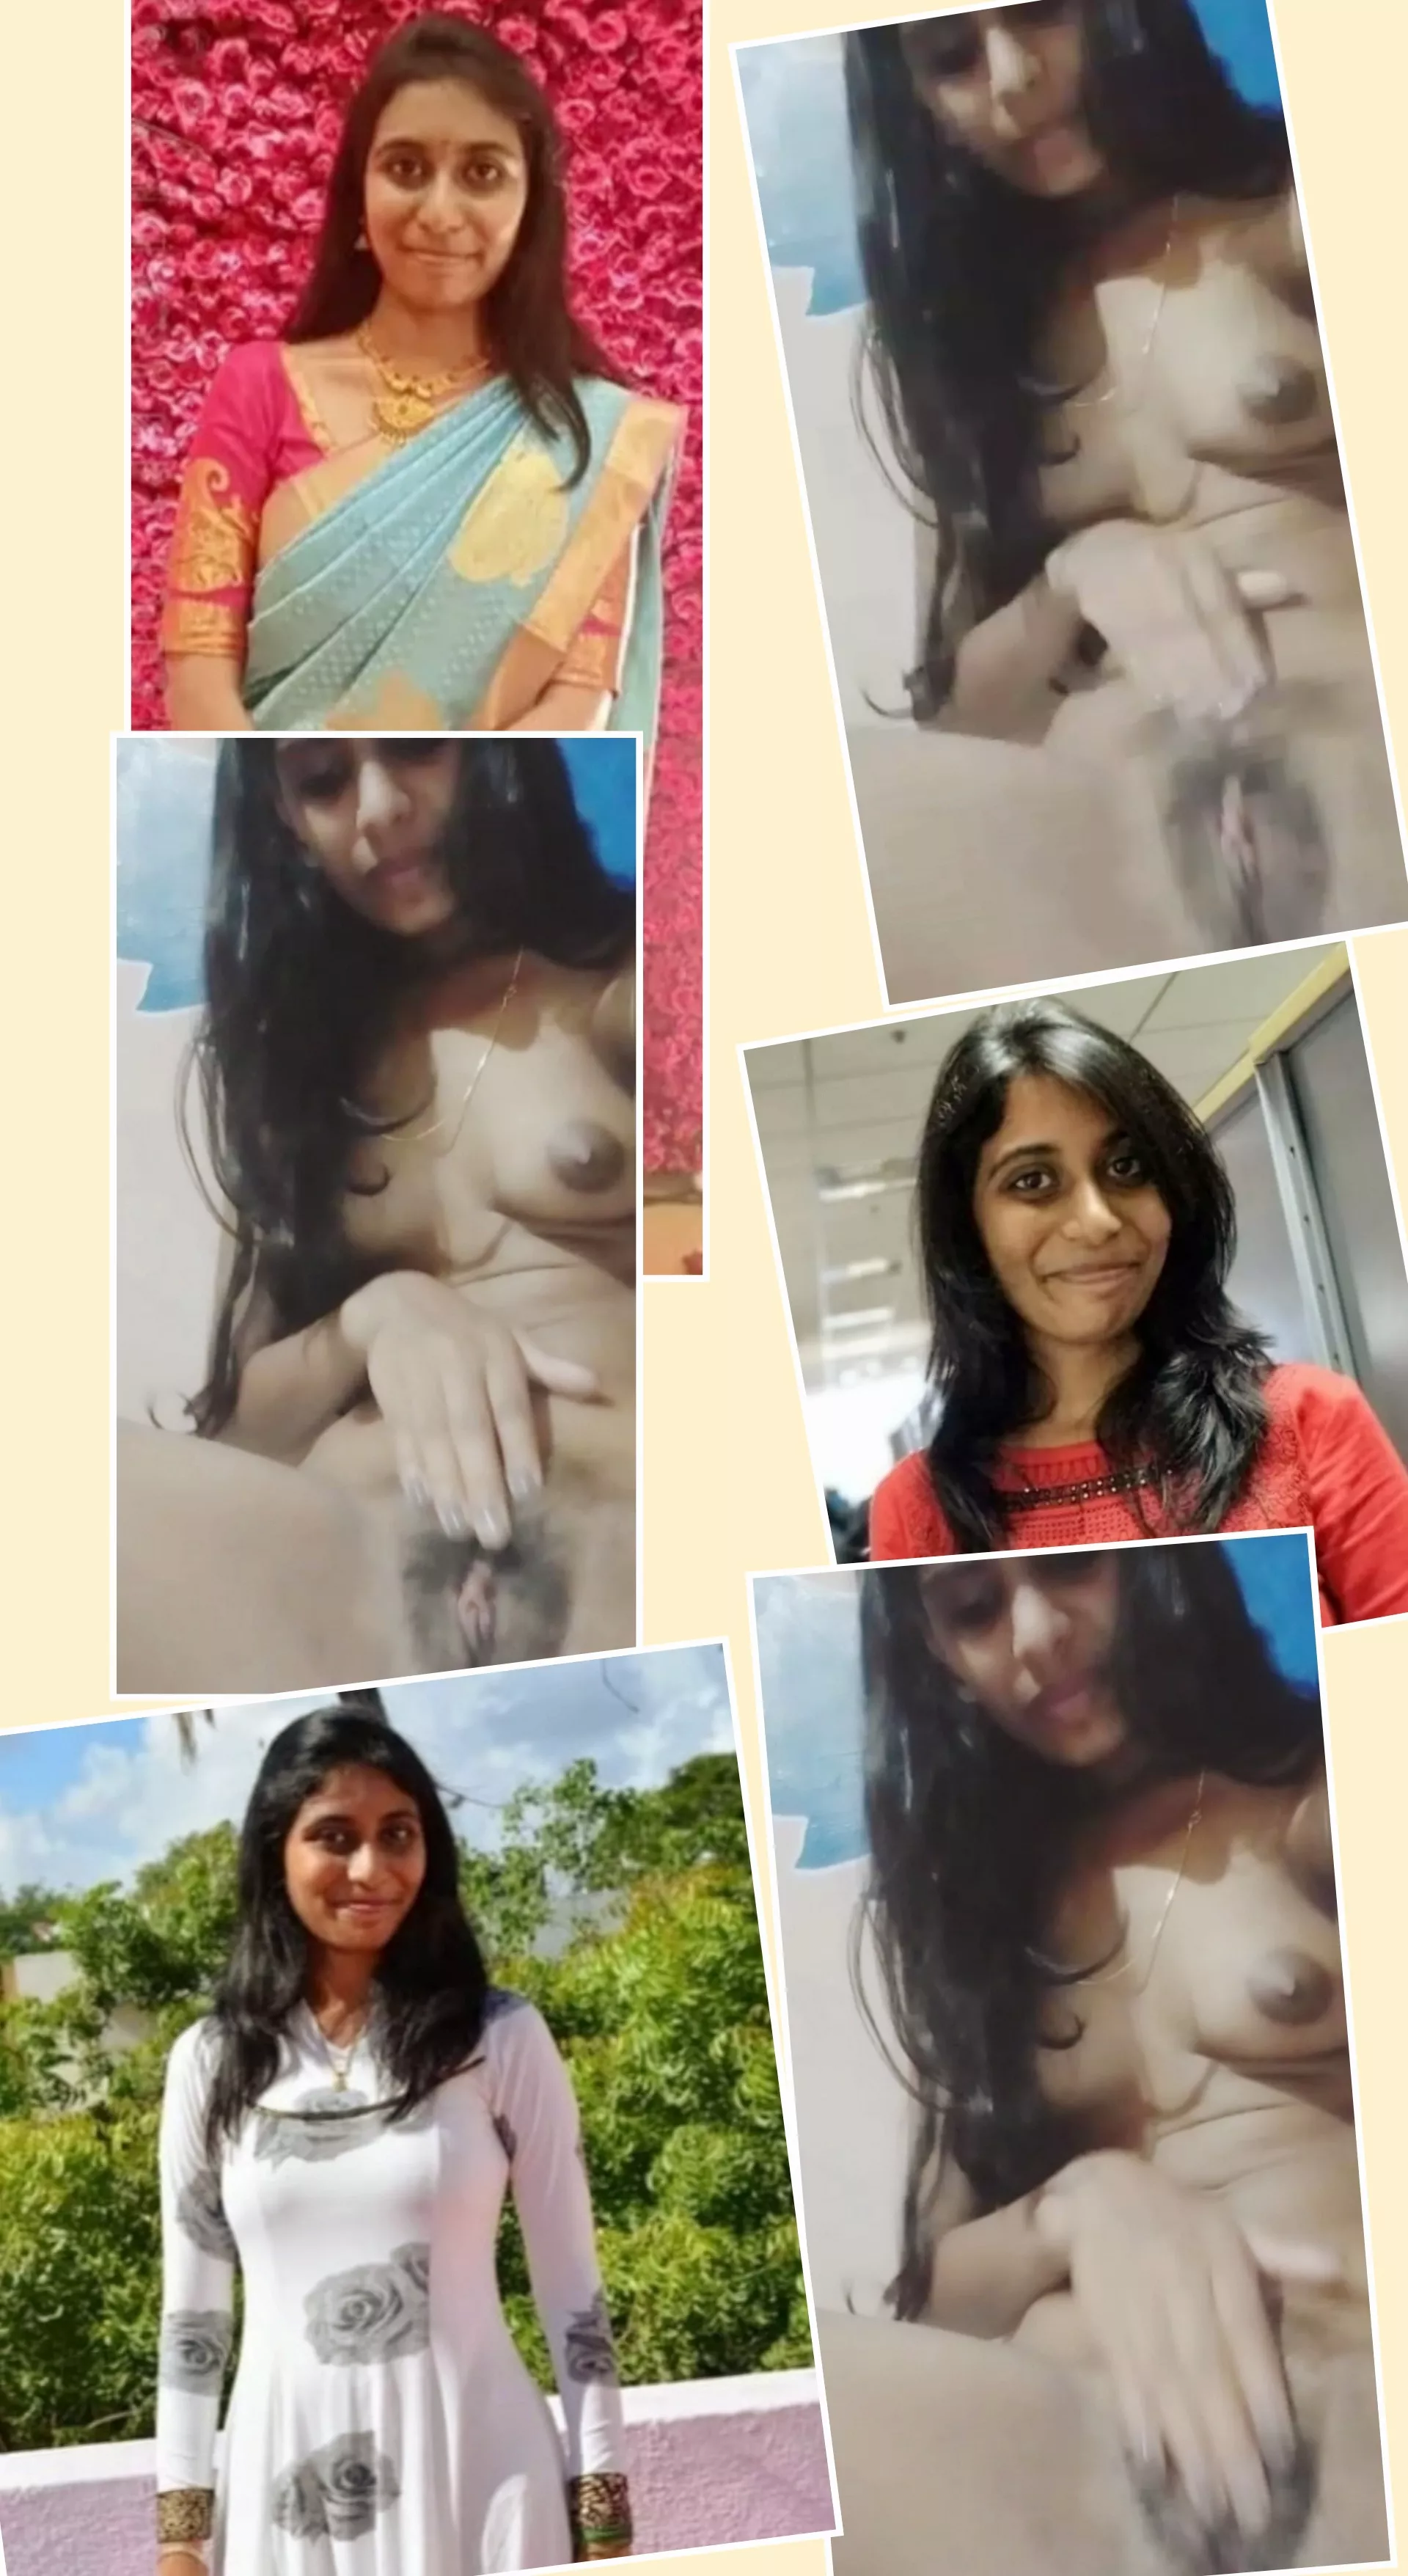 Homely girl sexy on/off nudes : IndianHot | NUDE-PICS.ORG